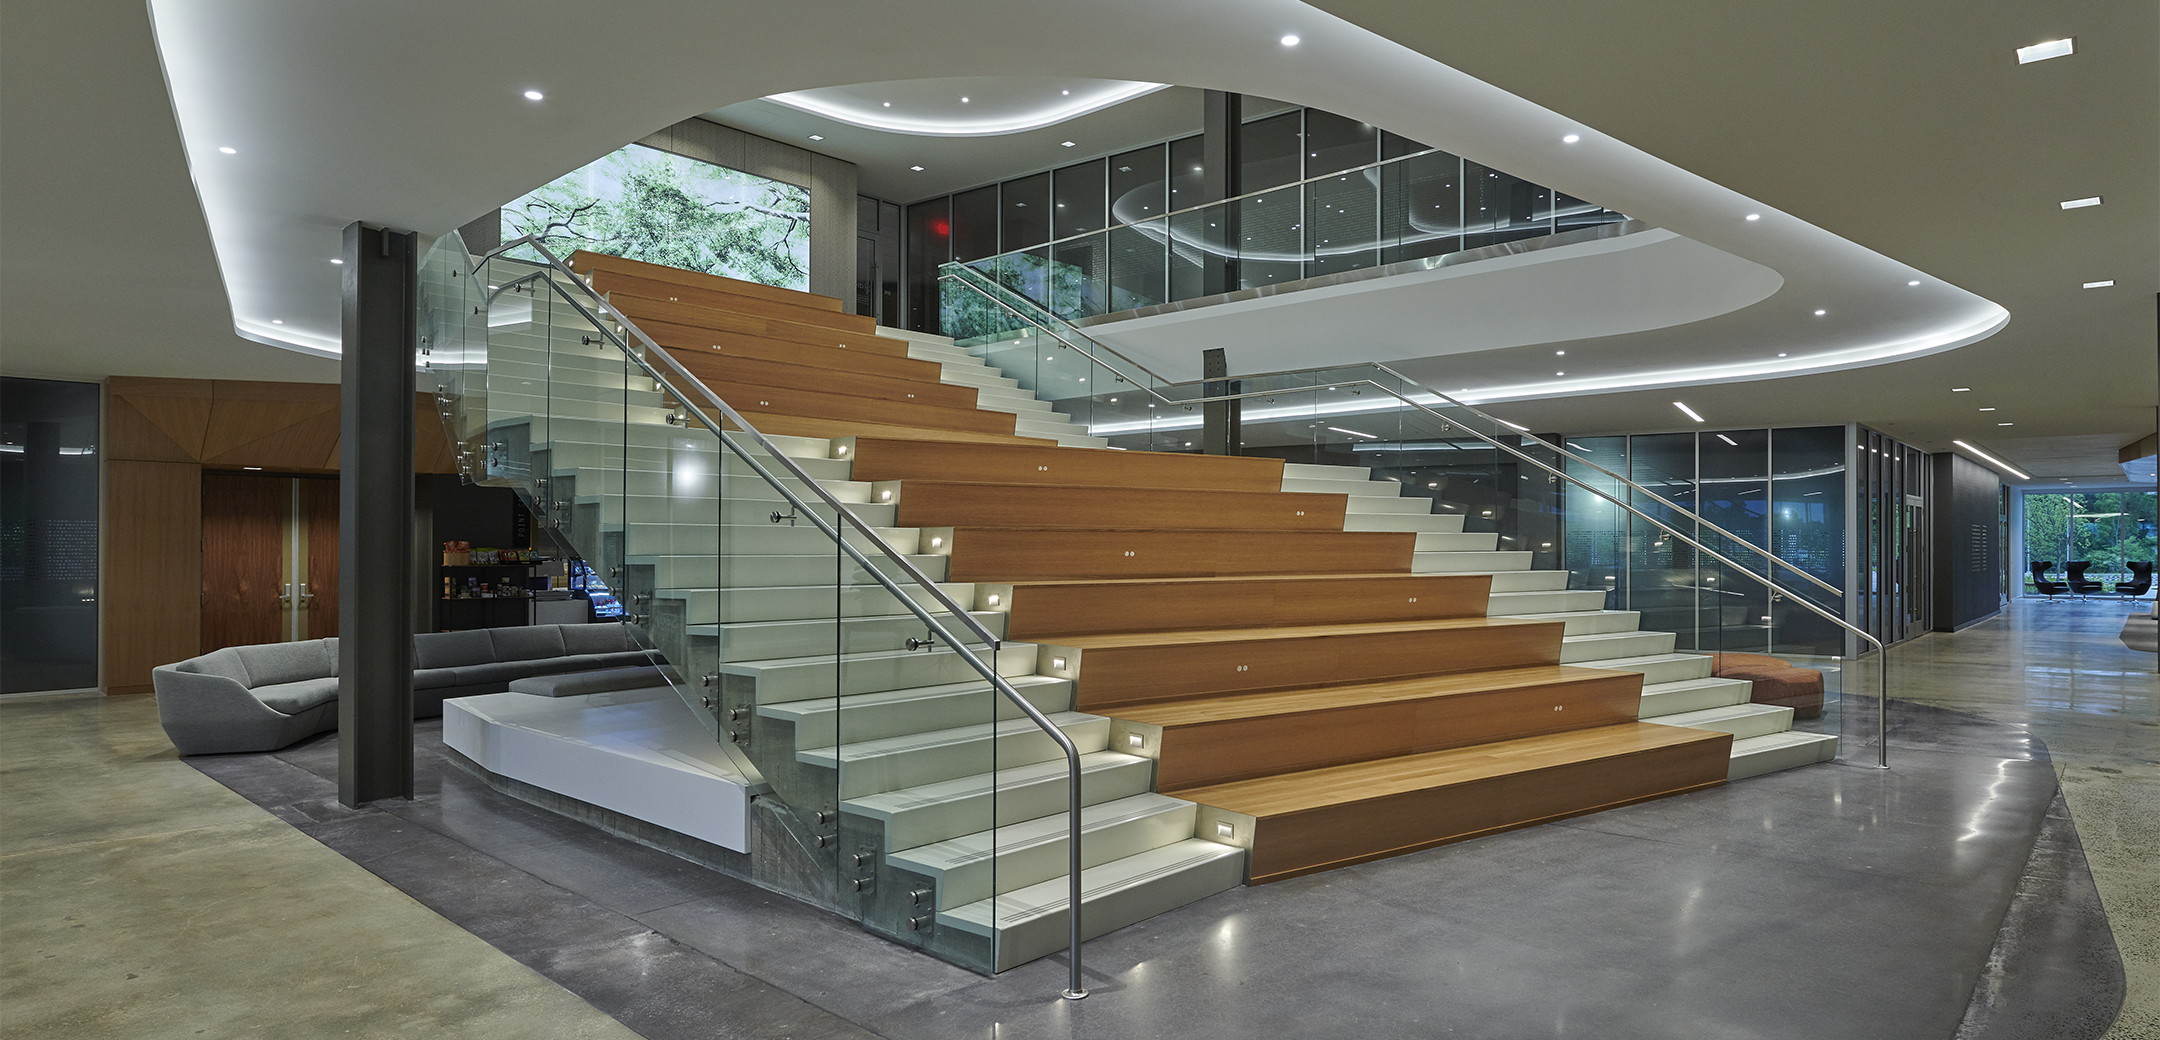 The interior lobby of Arborcrest Corporate Campus featuring grand stair of custom terrazzo in the center and conference rooms and a sitting area in the background.